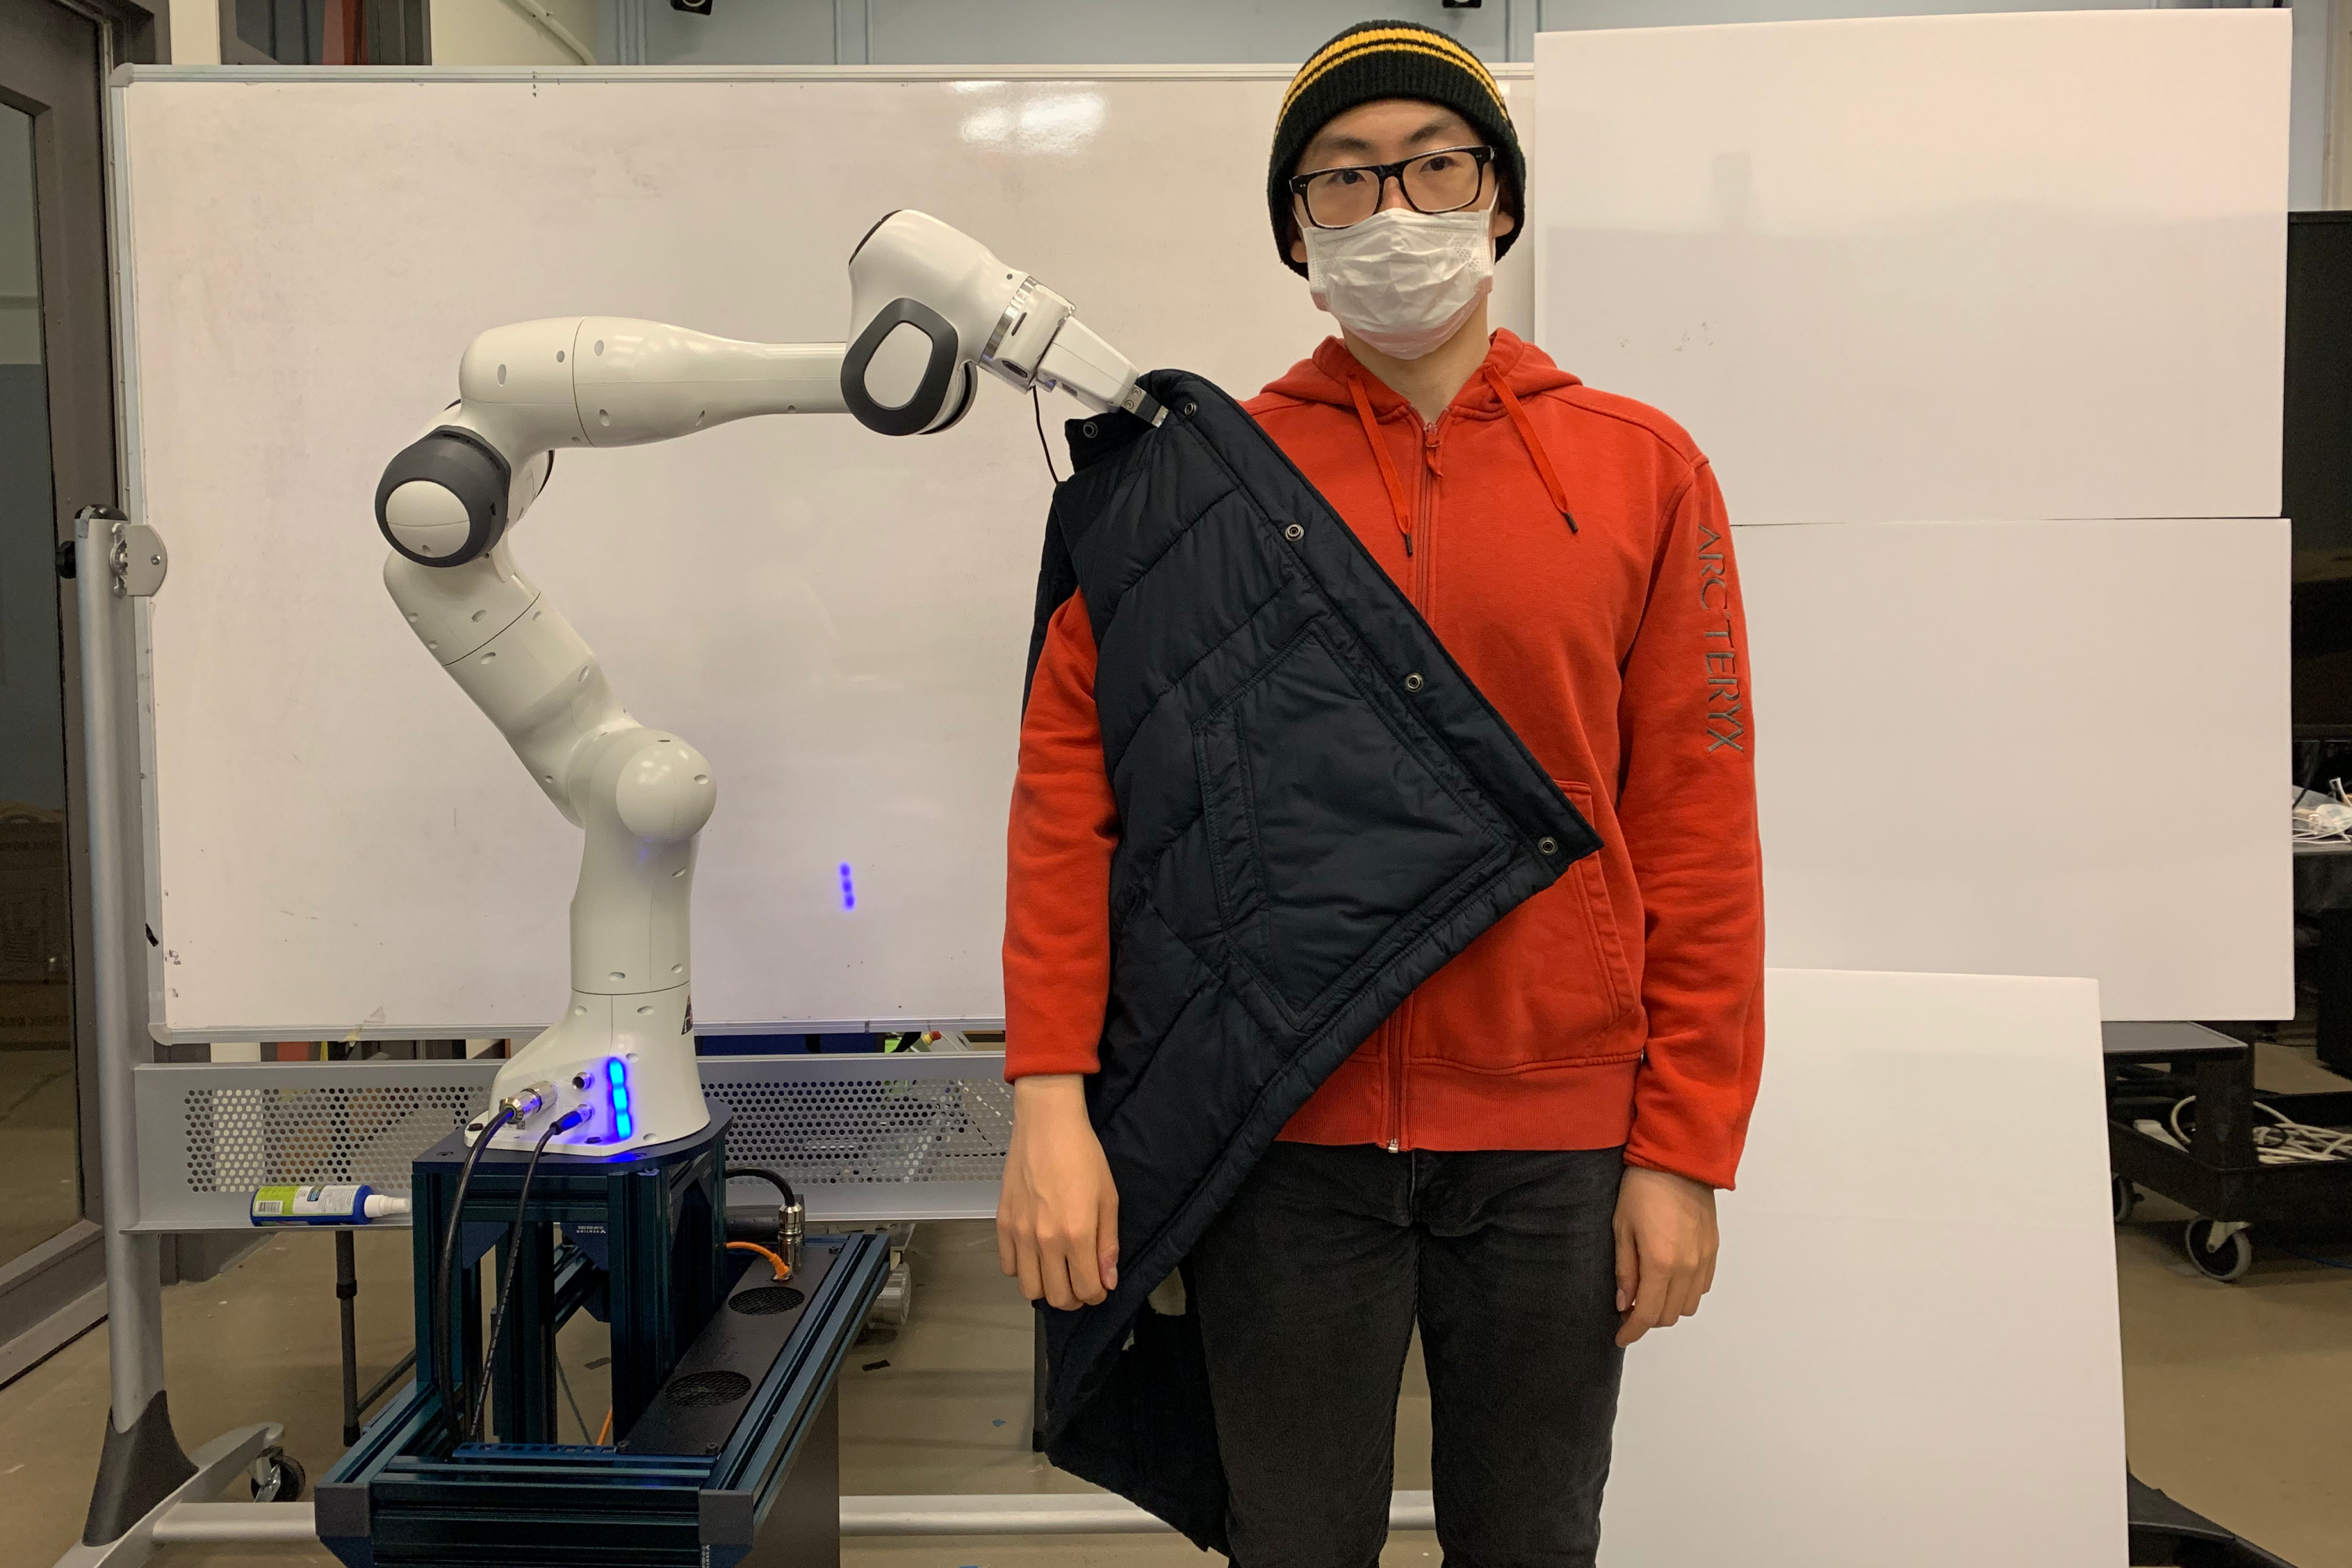 Getting dressed with help from robots | MIT News | Massachusetts Institute  of Technology